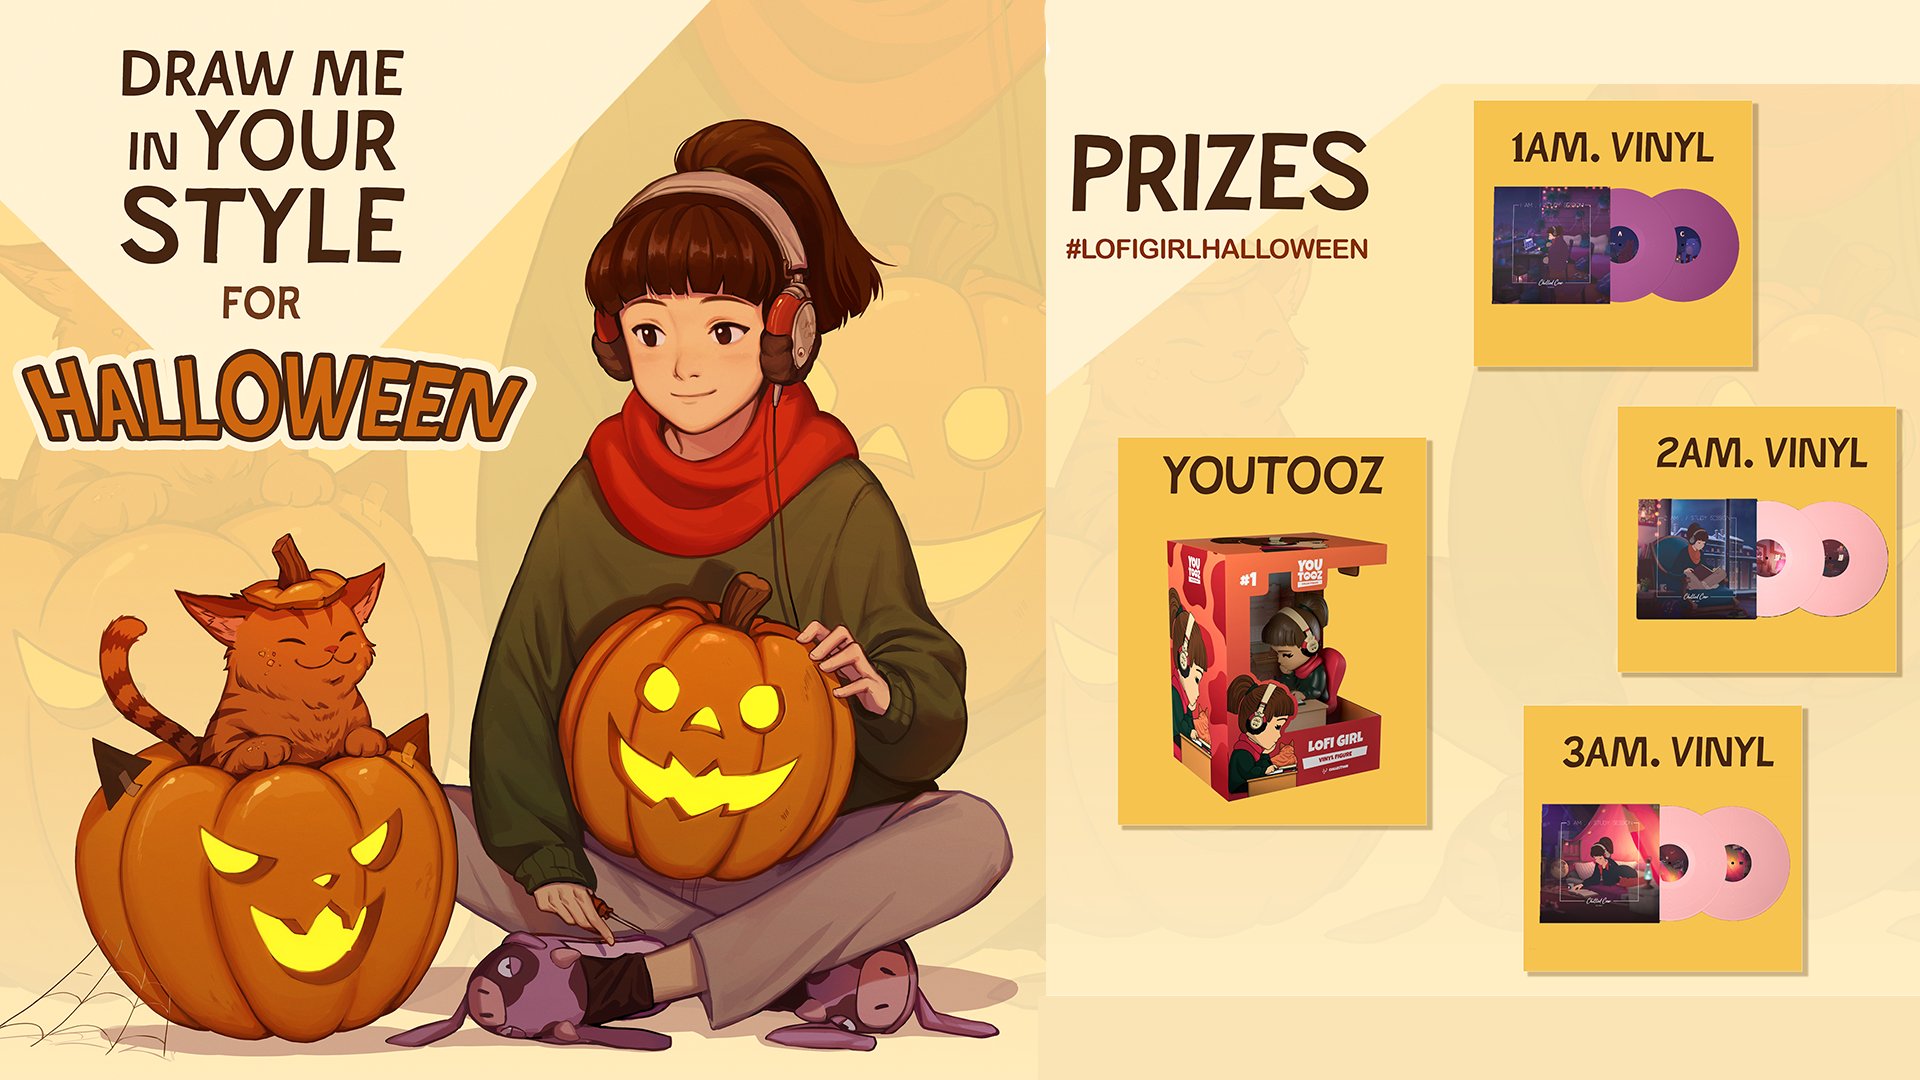 Lofi Girl's 1 week left to submit your drawing for the Halloween art contest